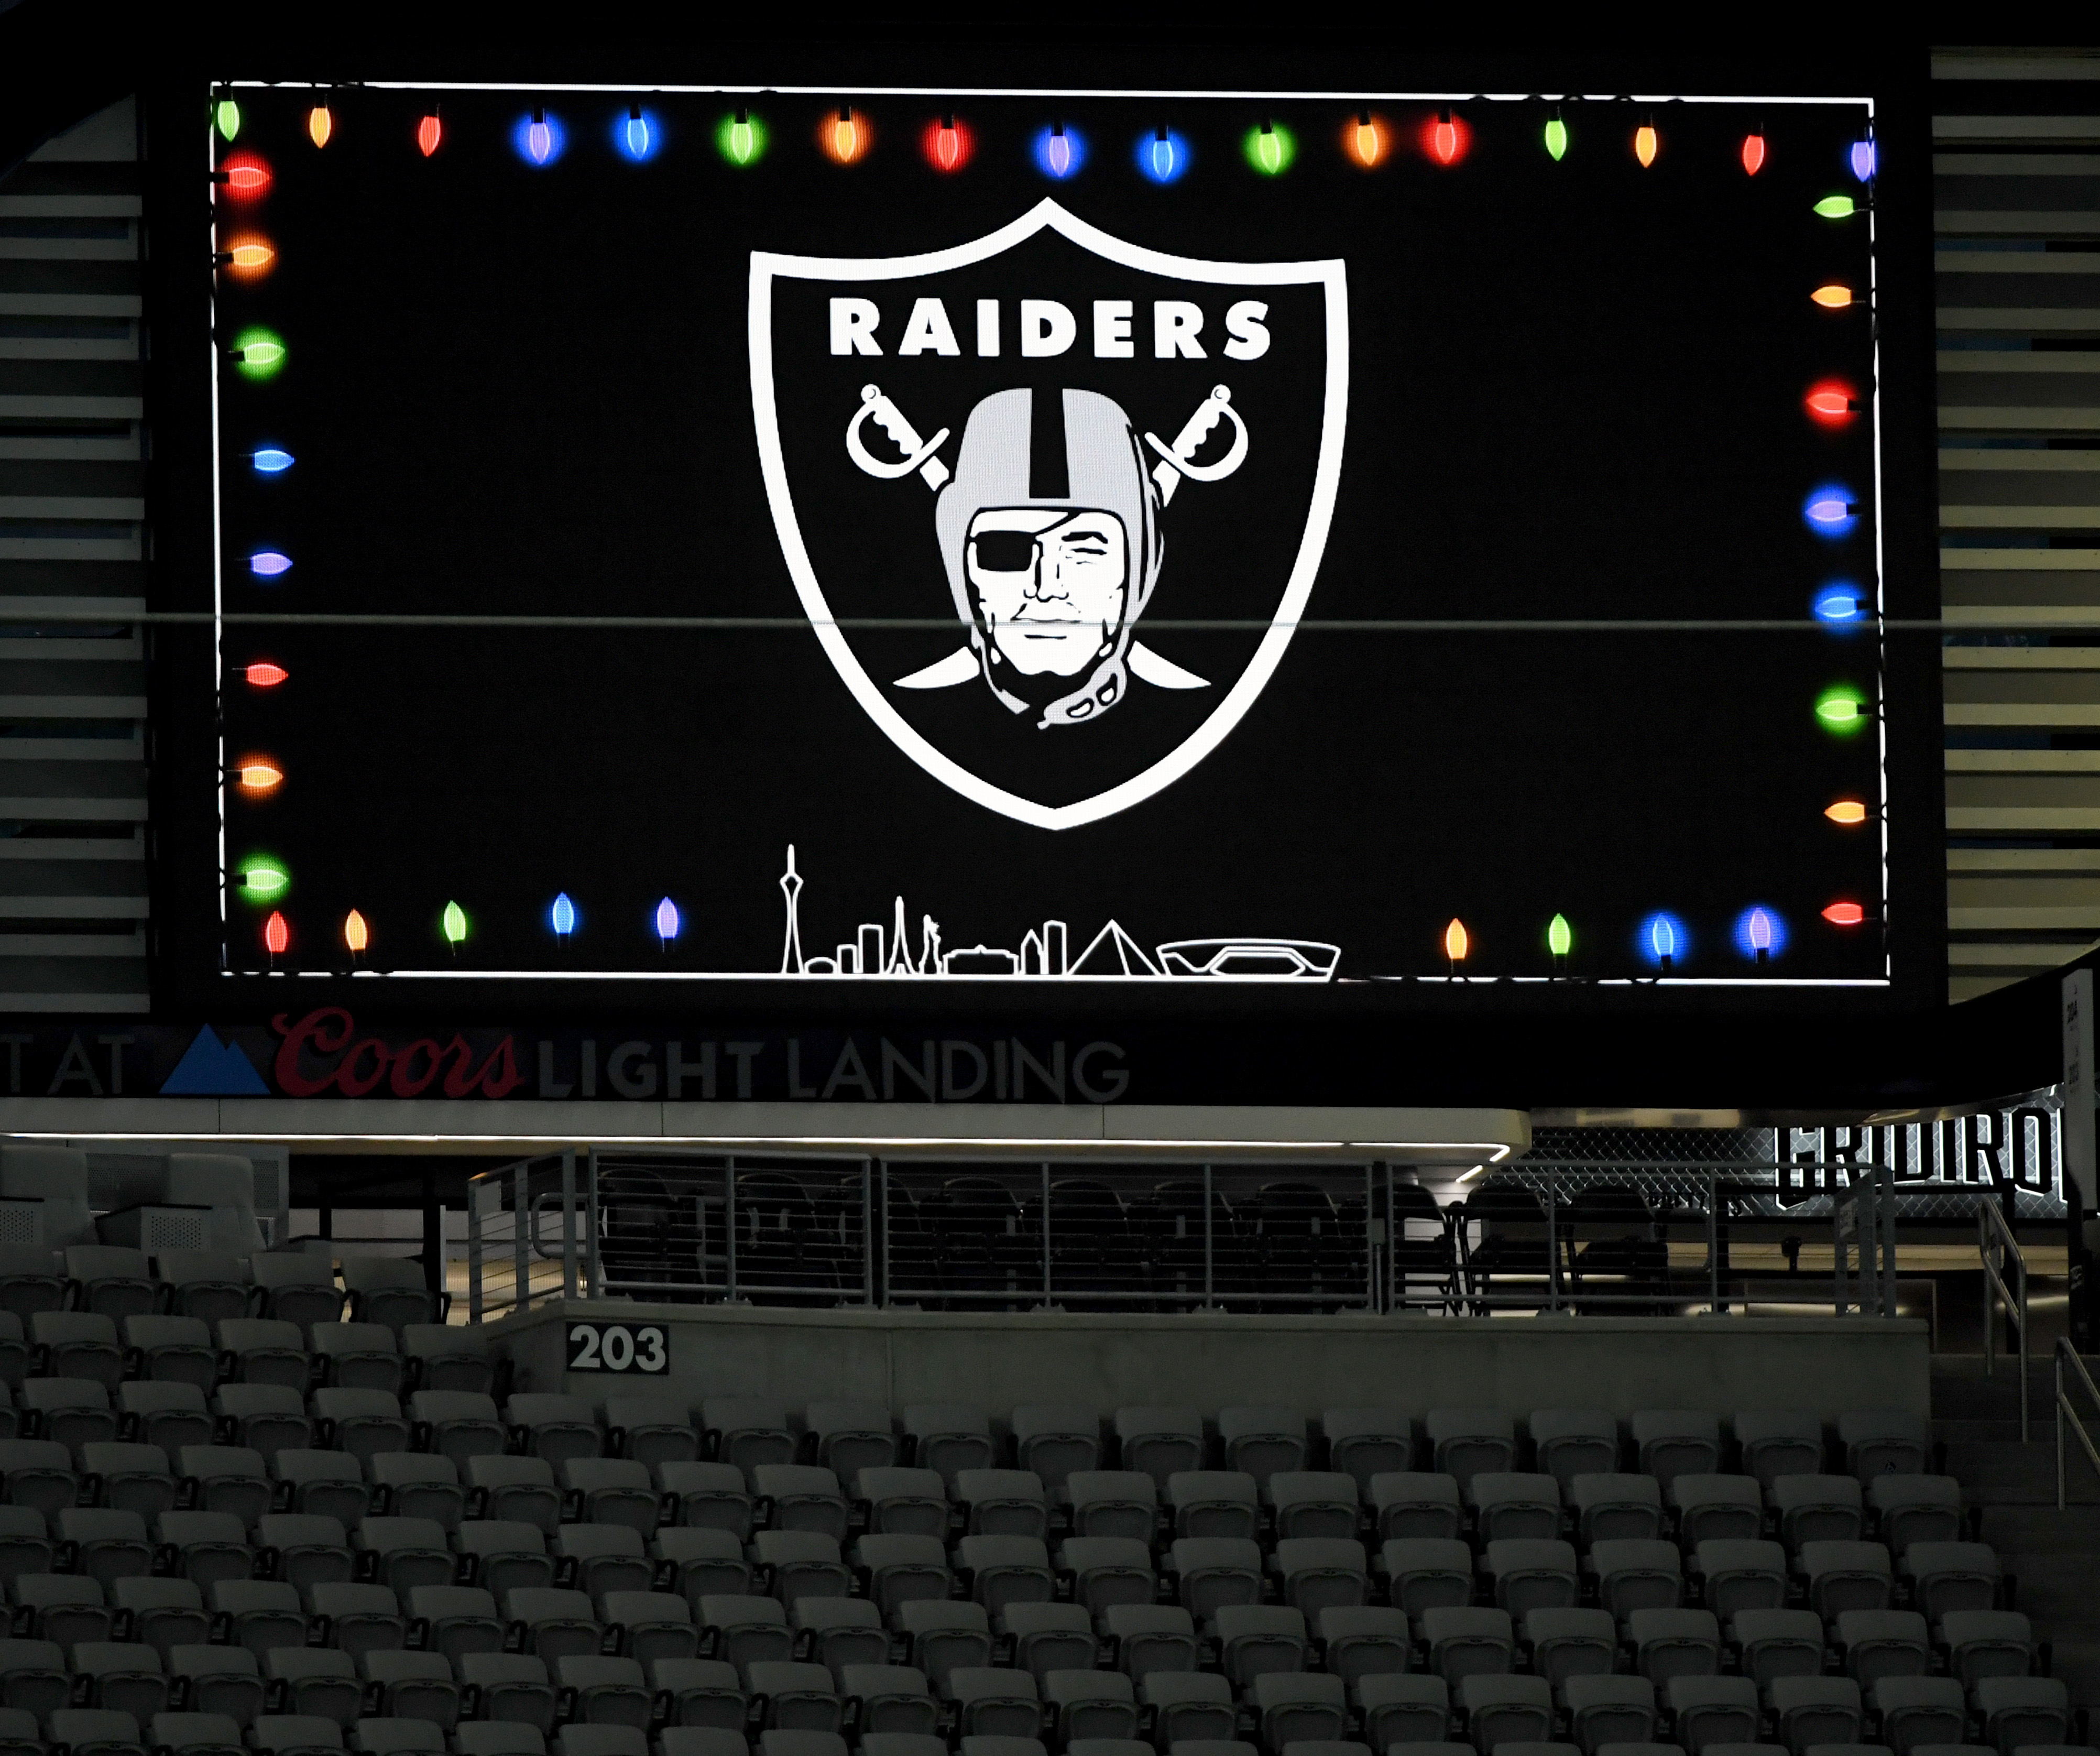 Raiders Reportedly Launch Internal Investigation After Departures of 4 Executives